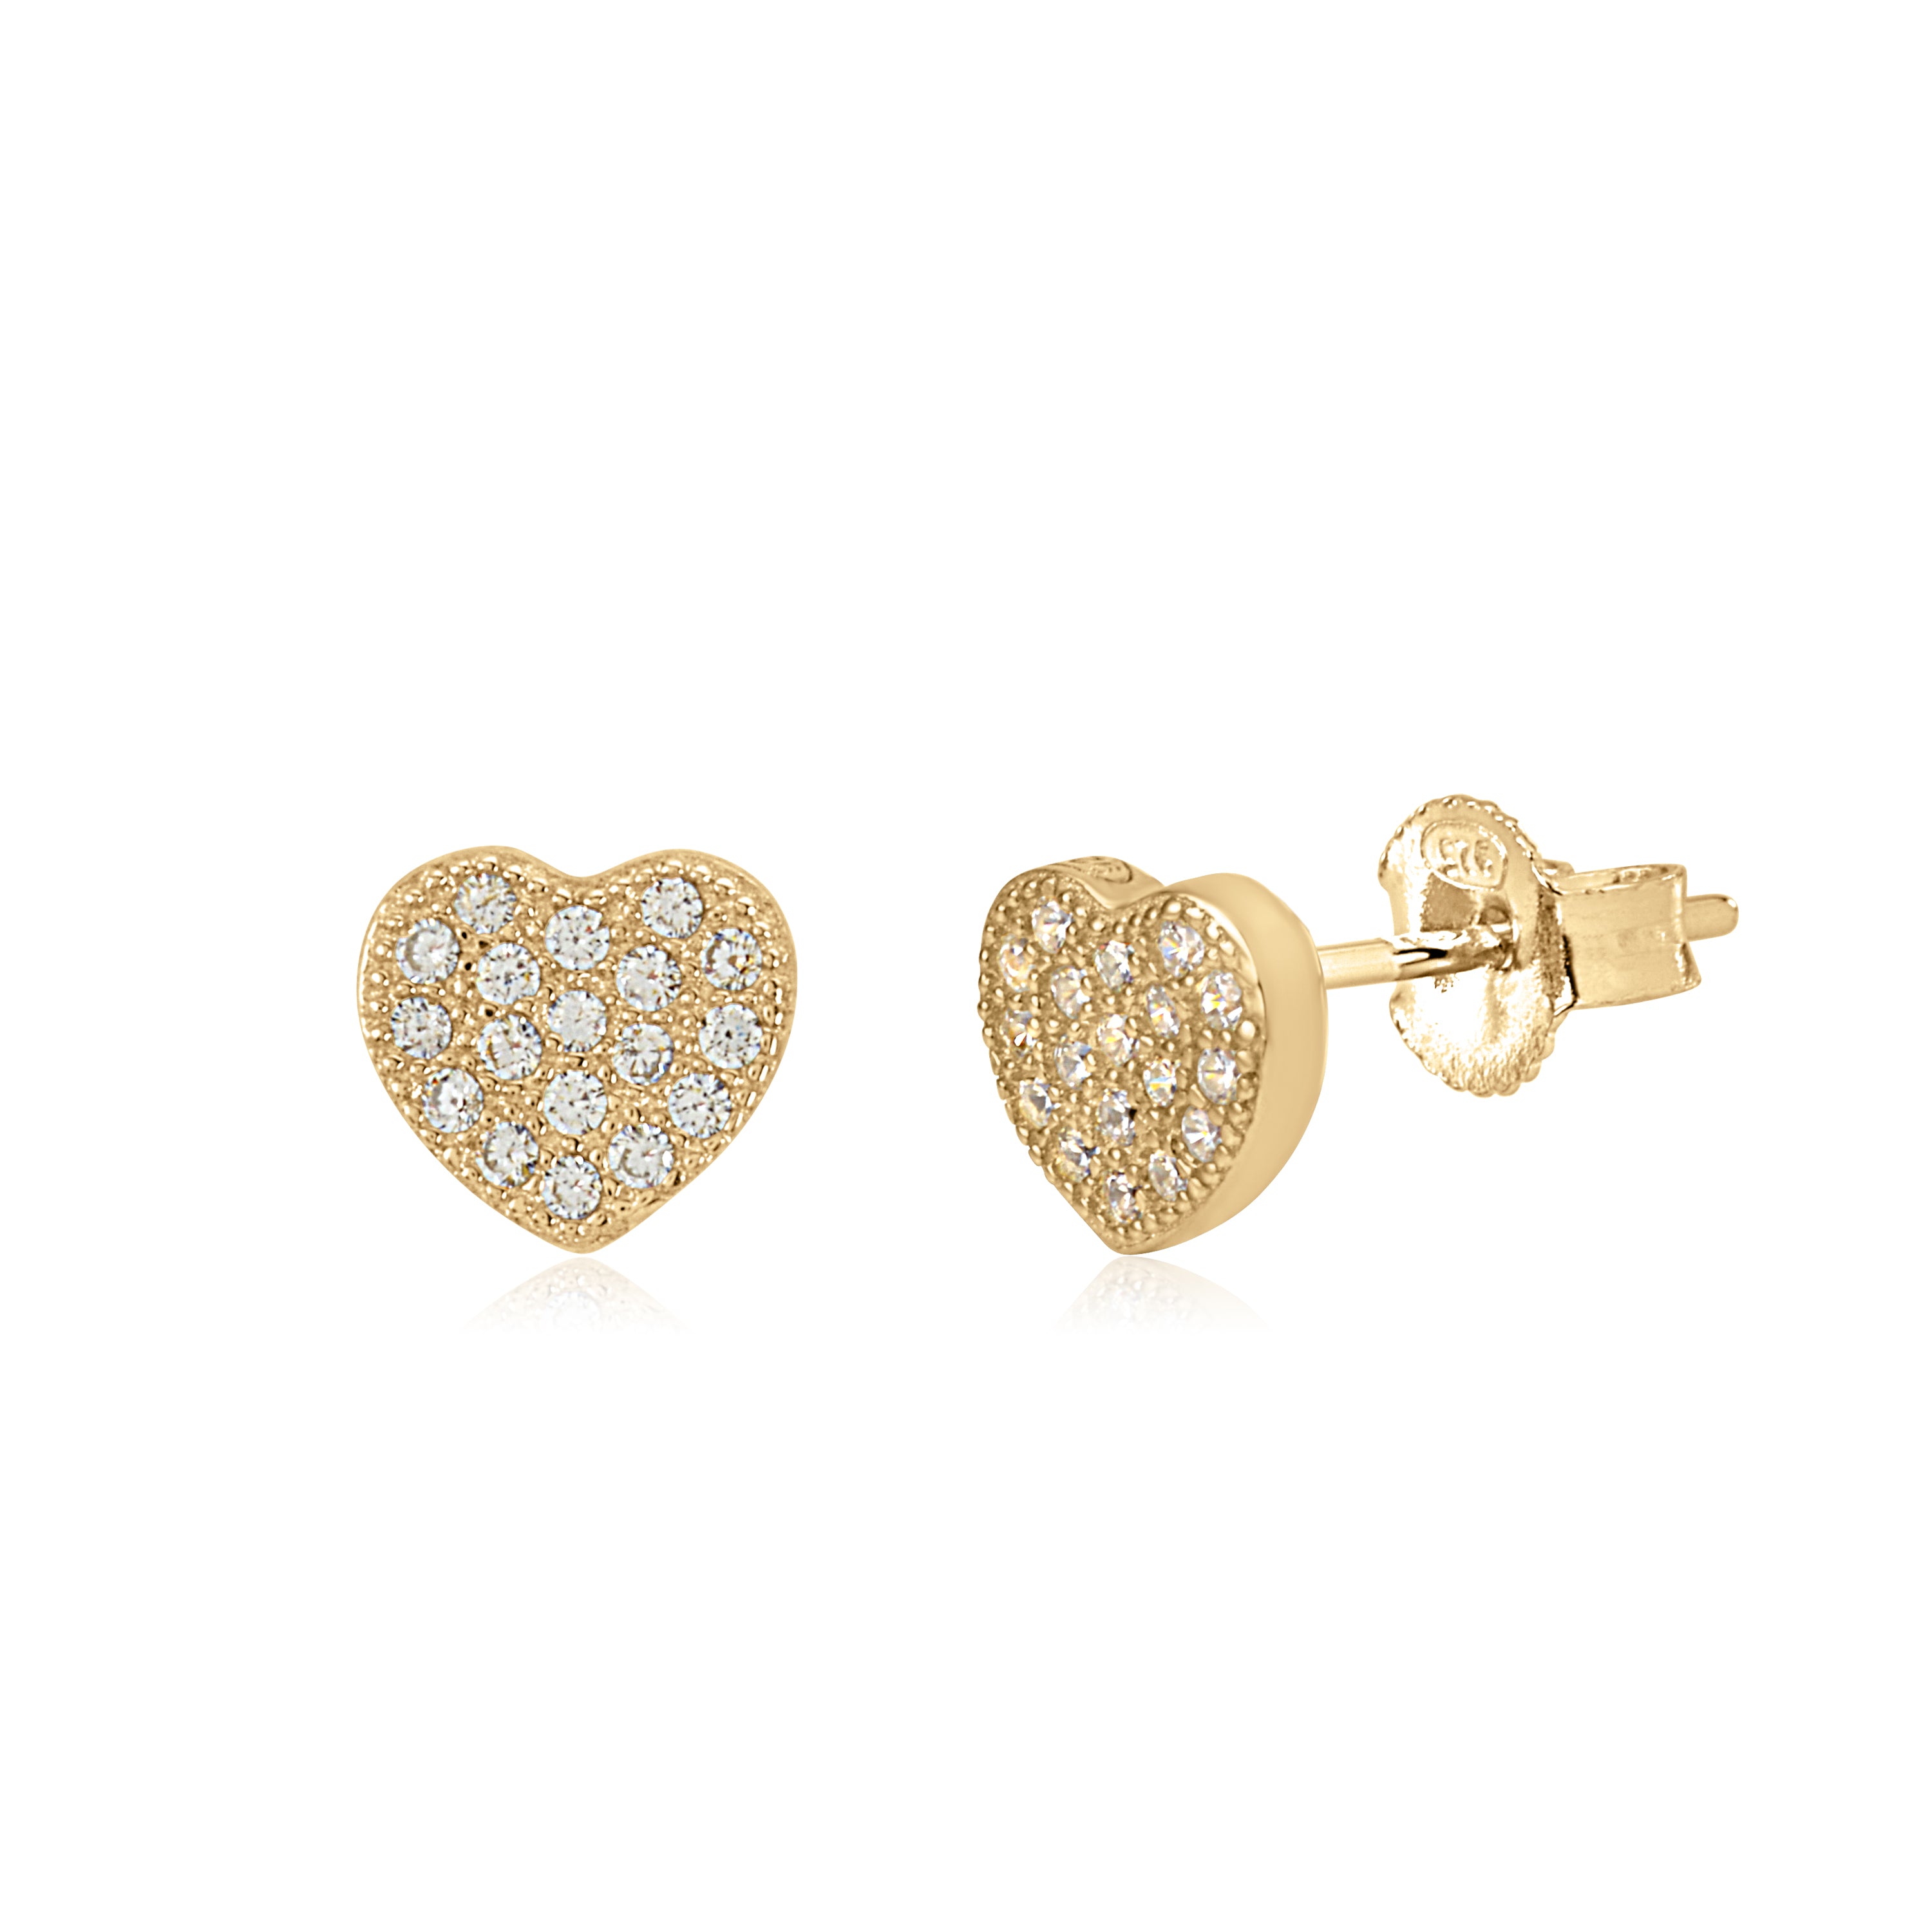 Heart Earrings in Sterling Silver with CZ Pavé or Yellow Gold Plated